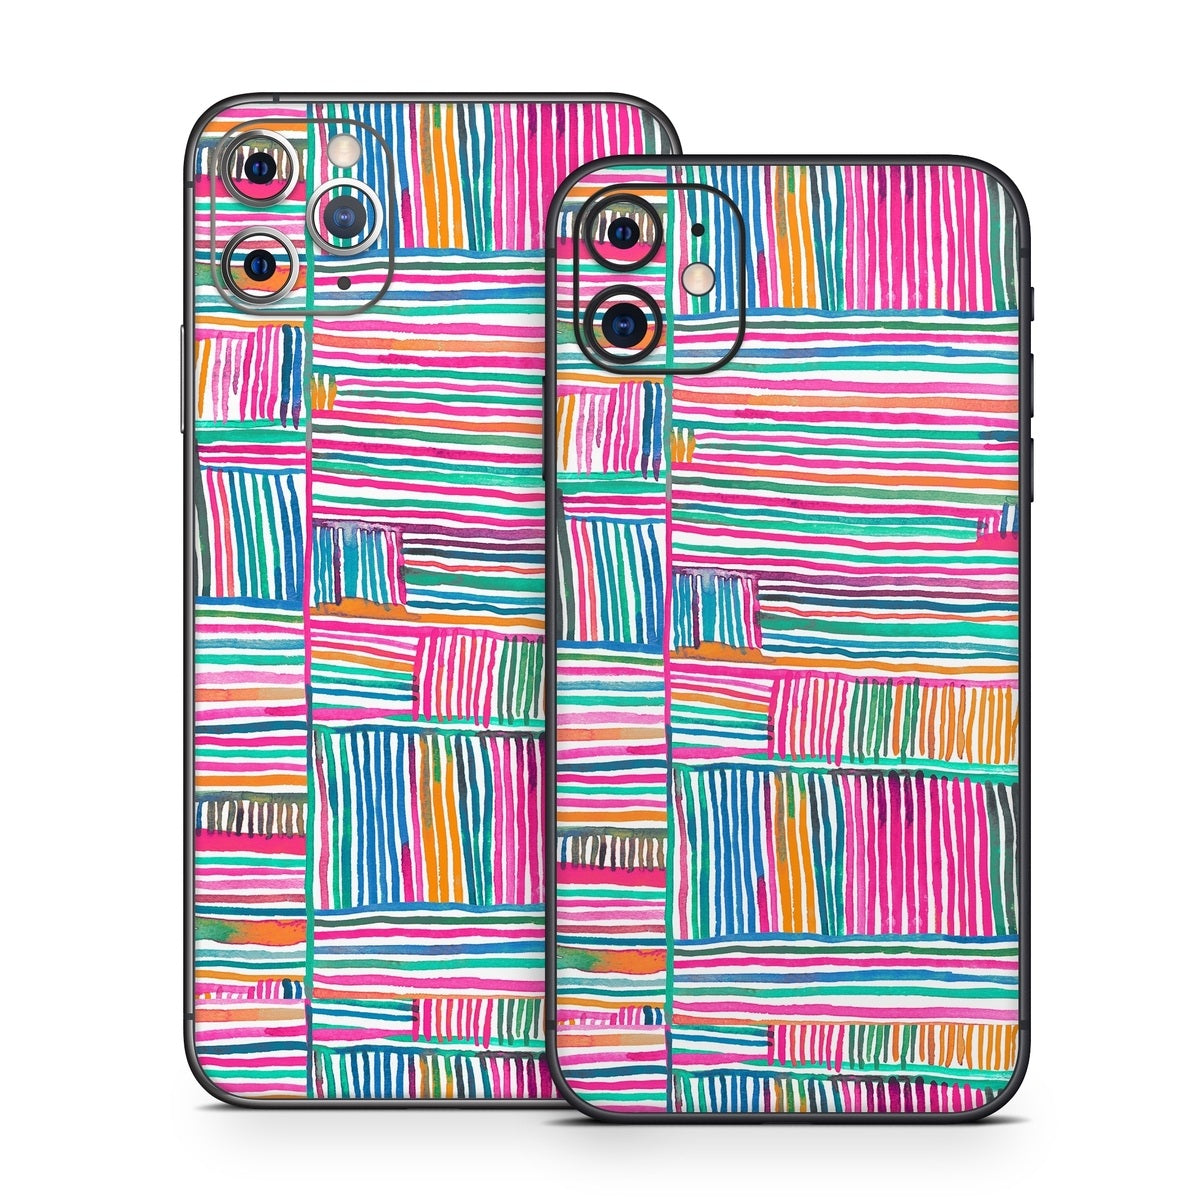 Relaxing Stripes - Apple iPhone 11 Skin